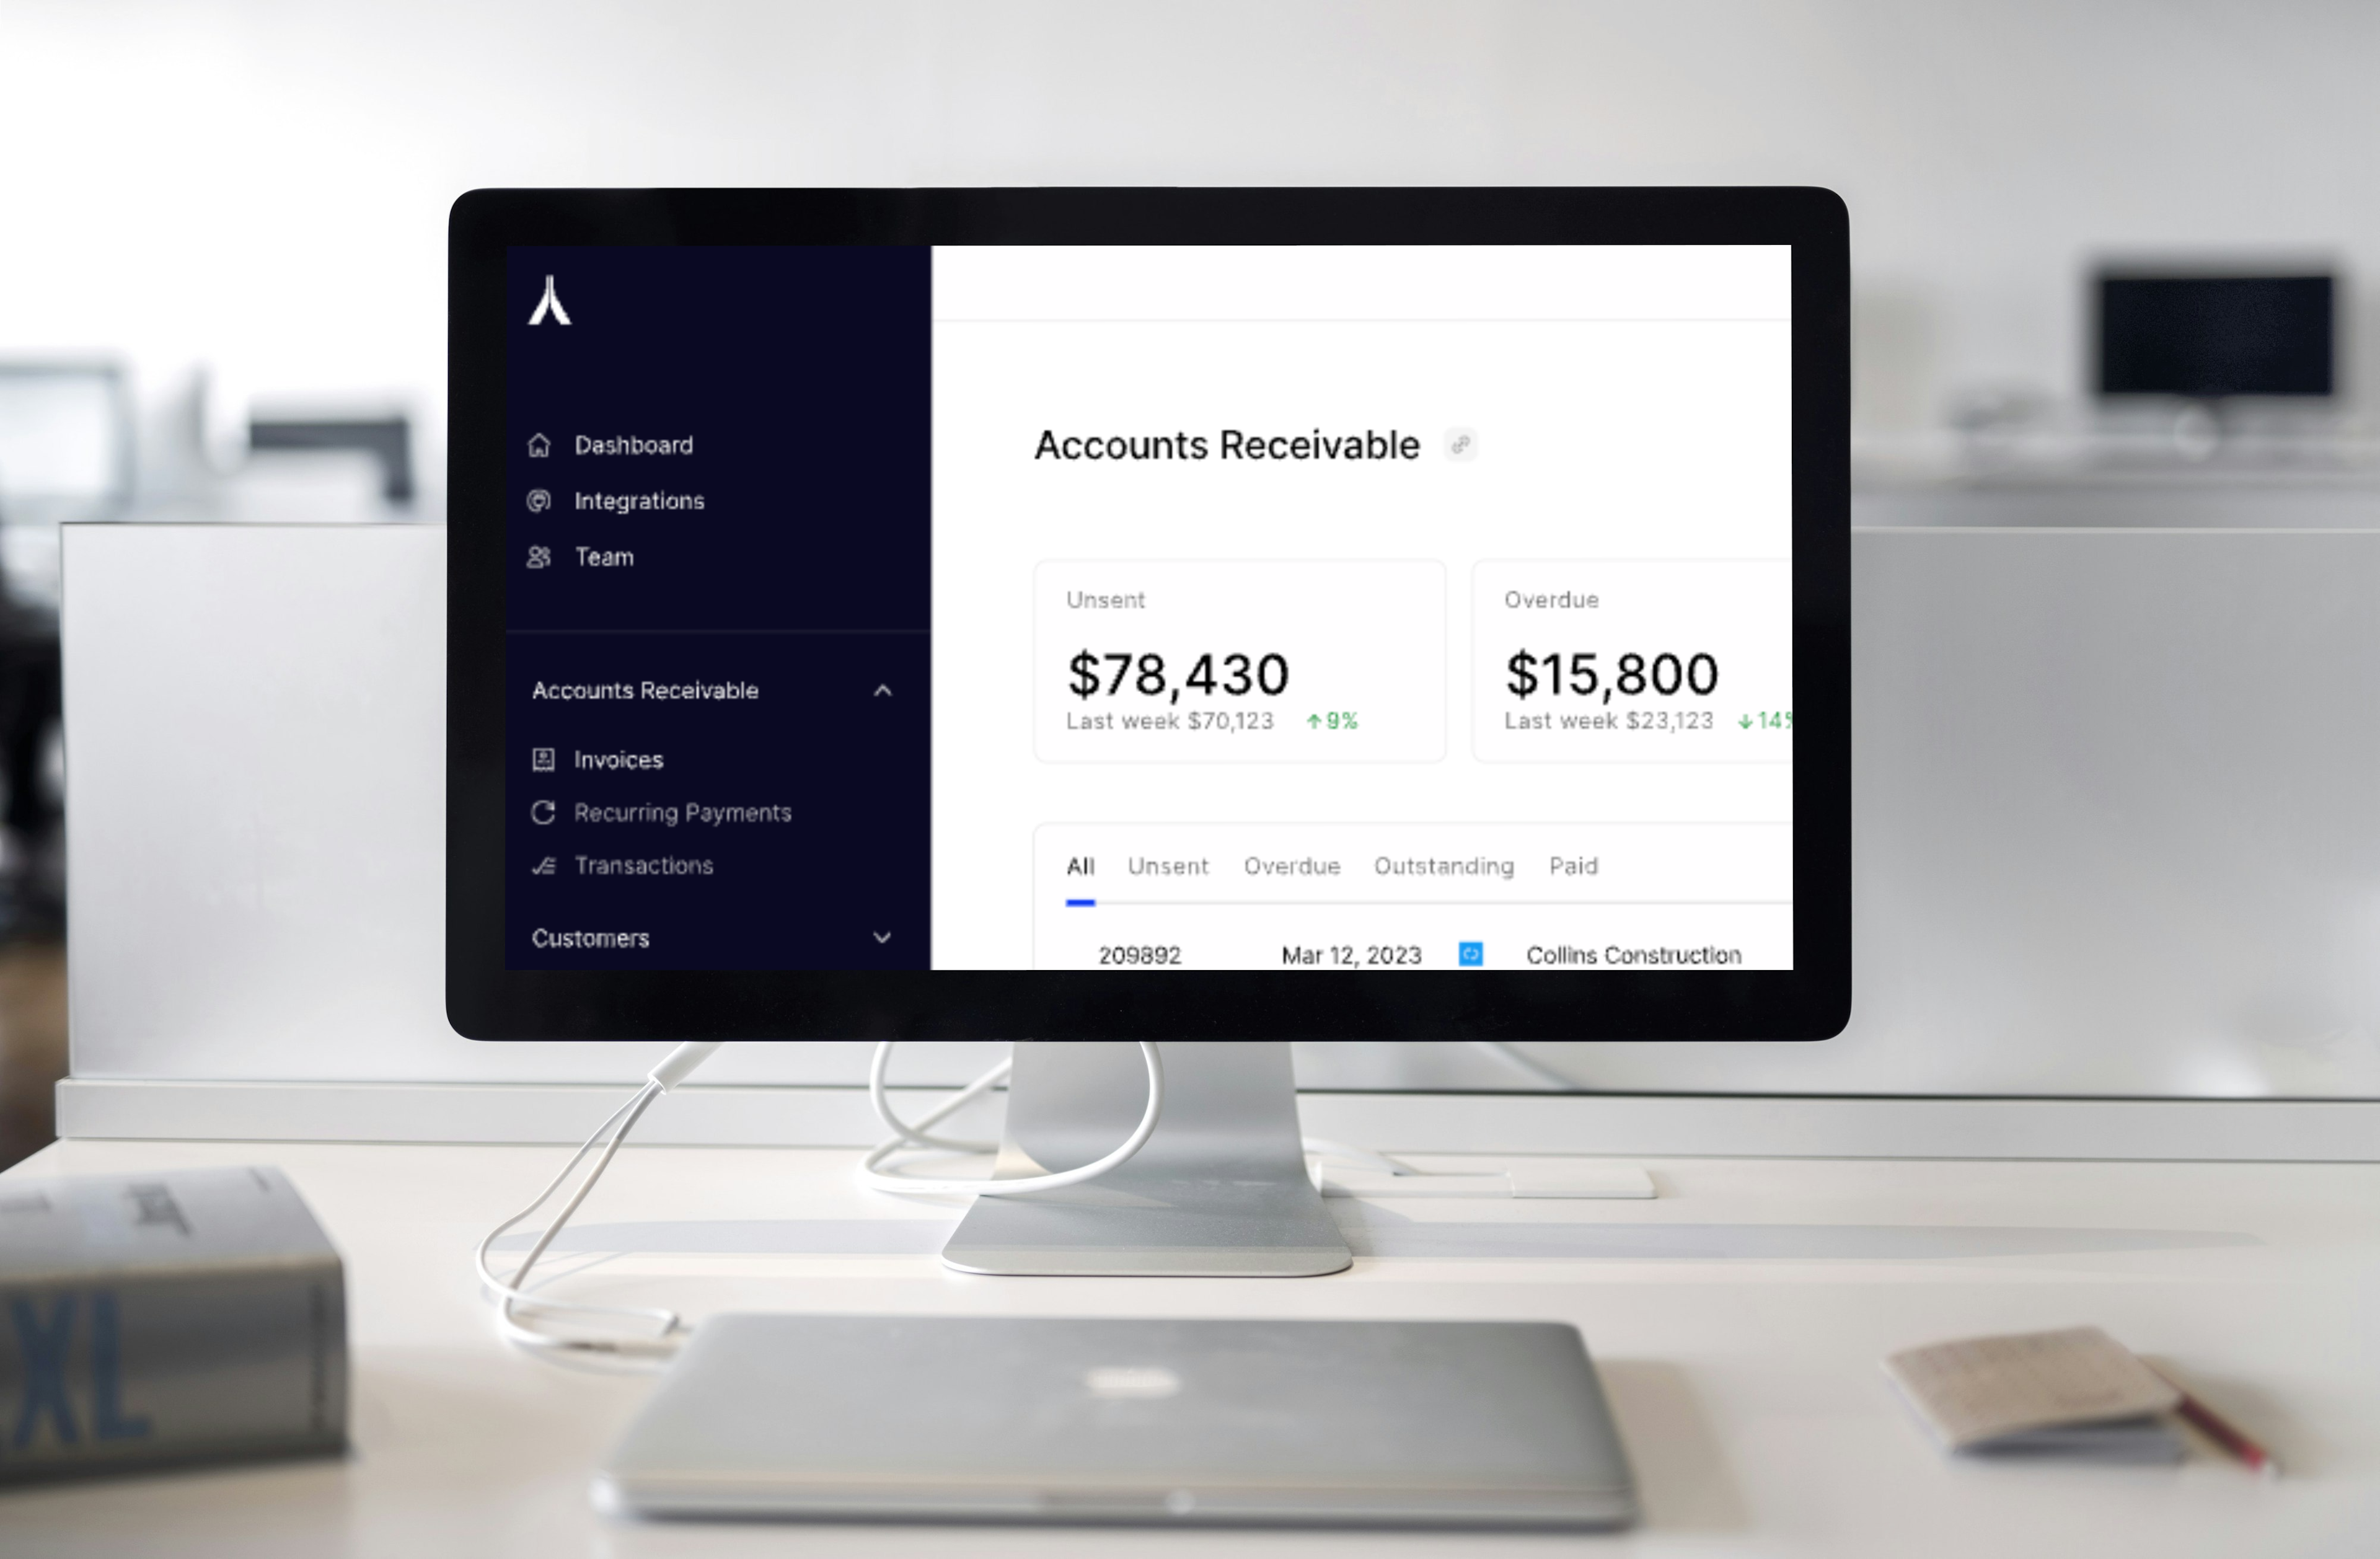 A mockup of Alternative Payments platform that specifically references the Accounts Receivable functional page of the software.